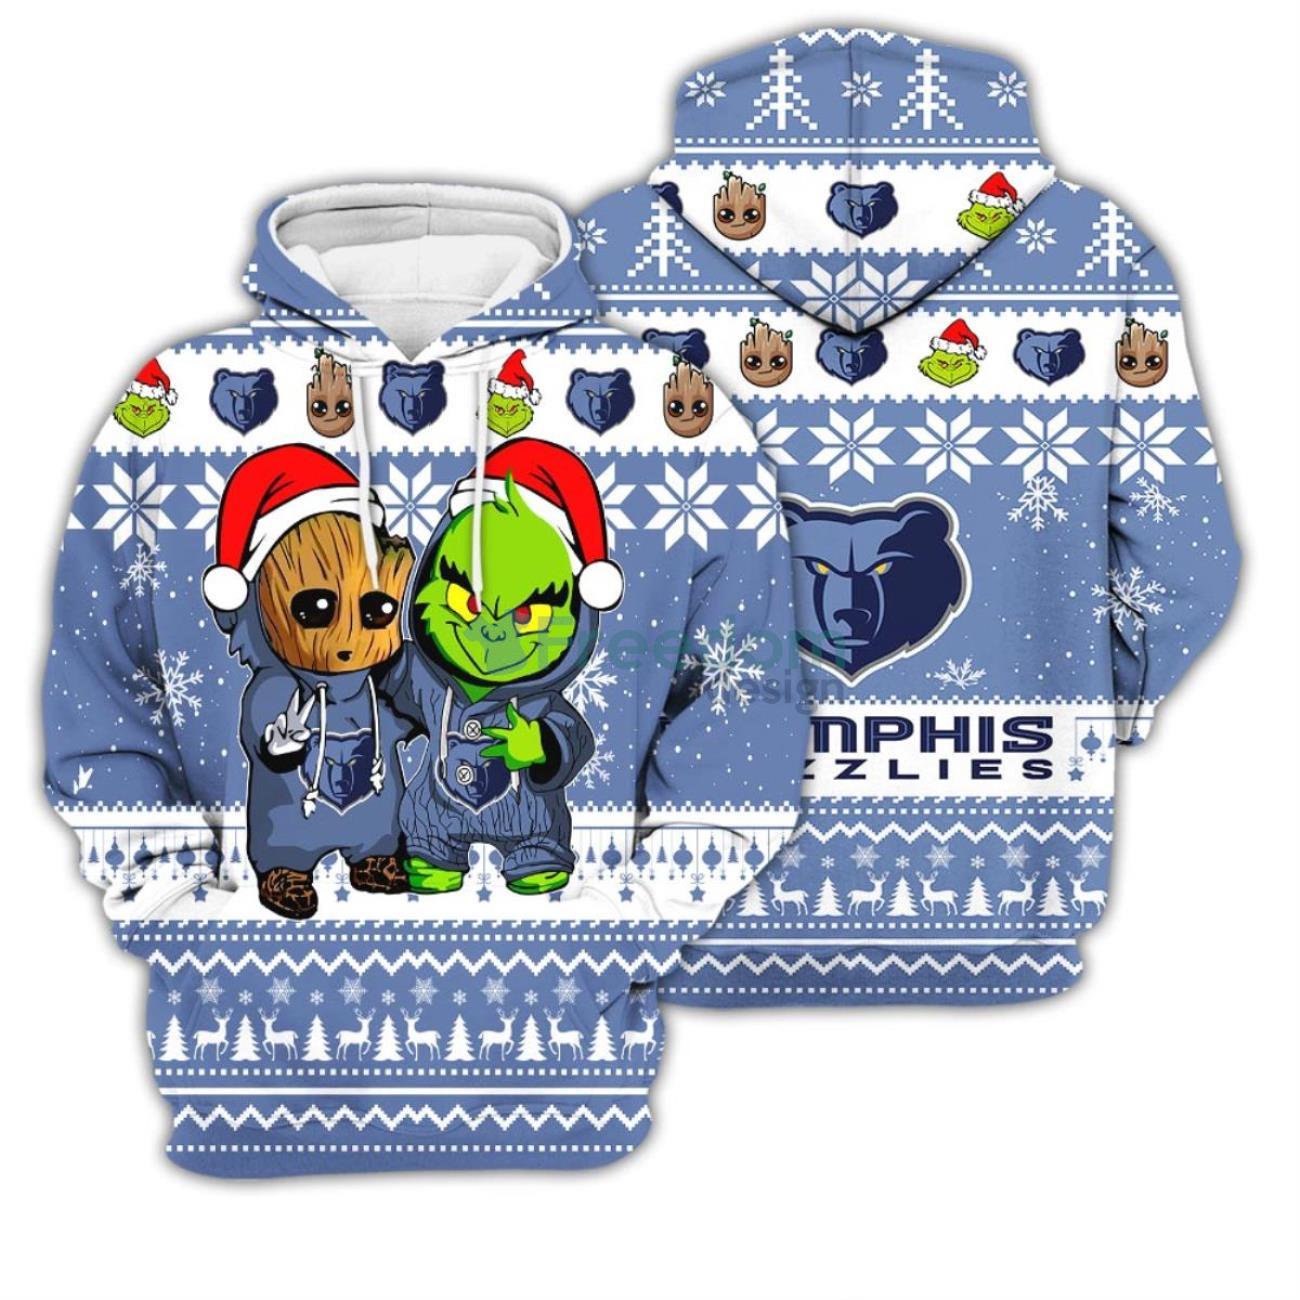 Miami Heat Baby Groot And Grinch Best Friends 3D Chirstmas Sweater